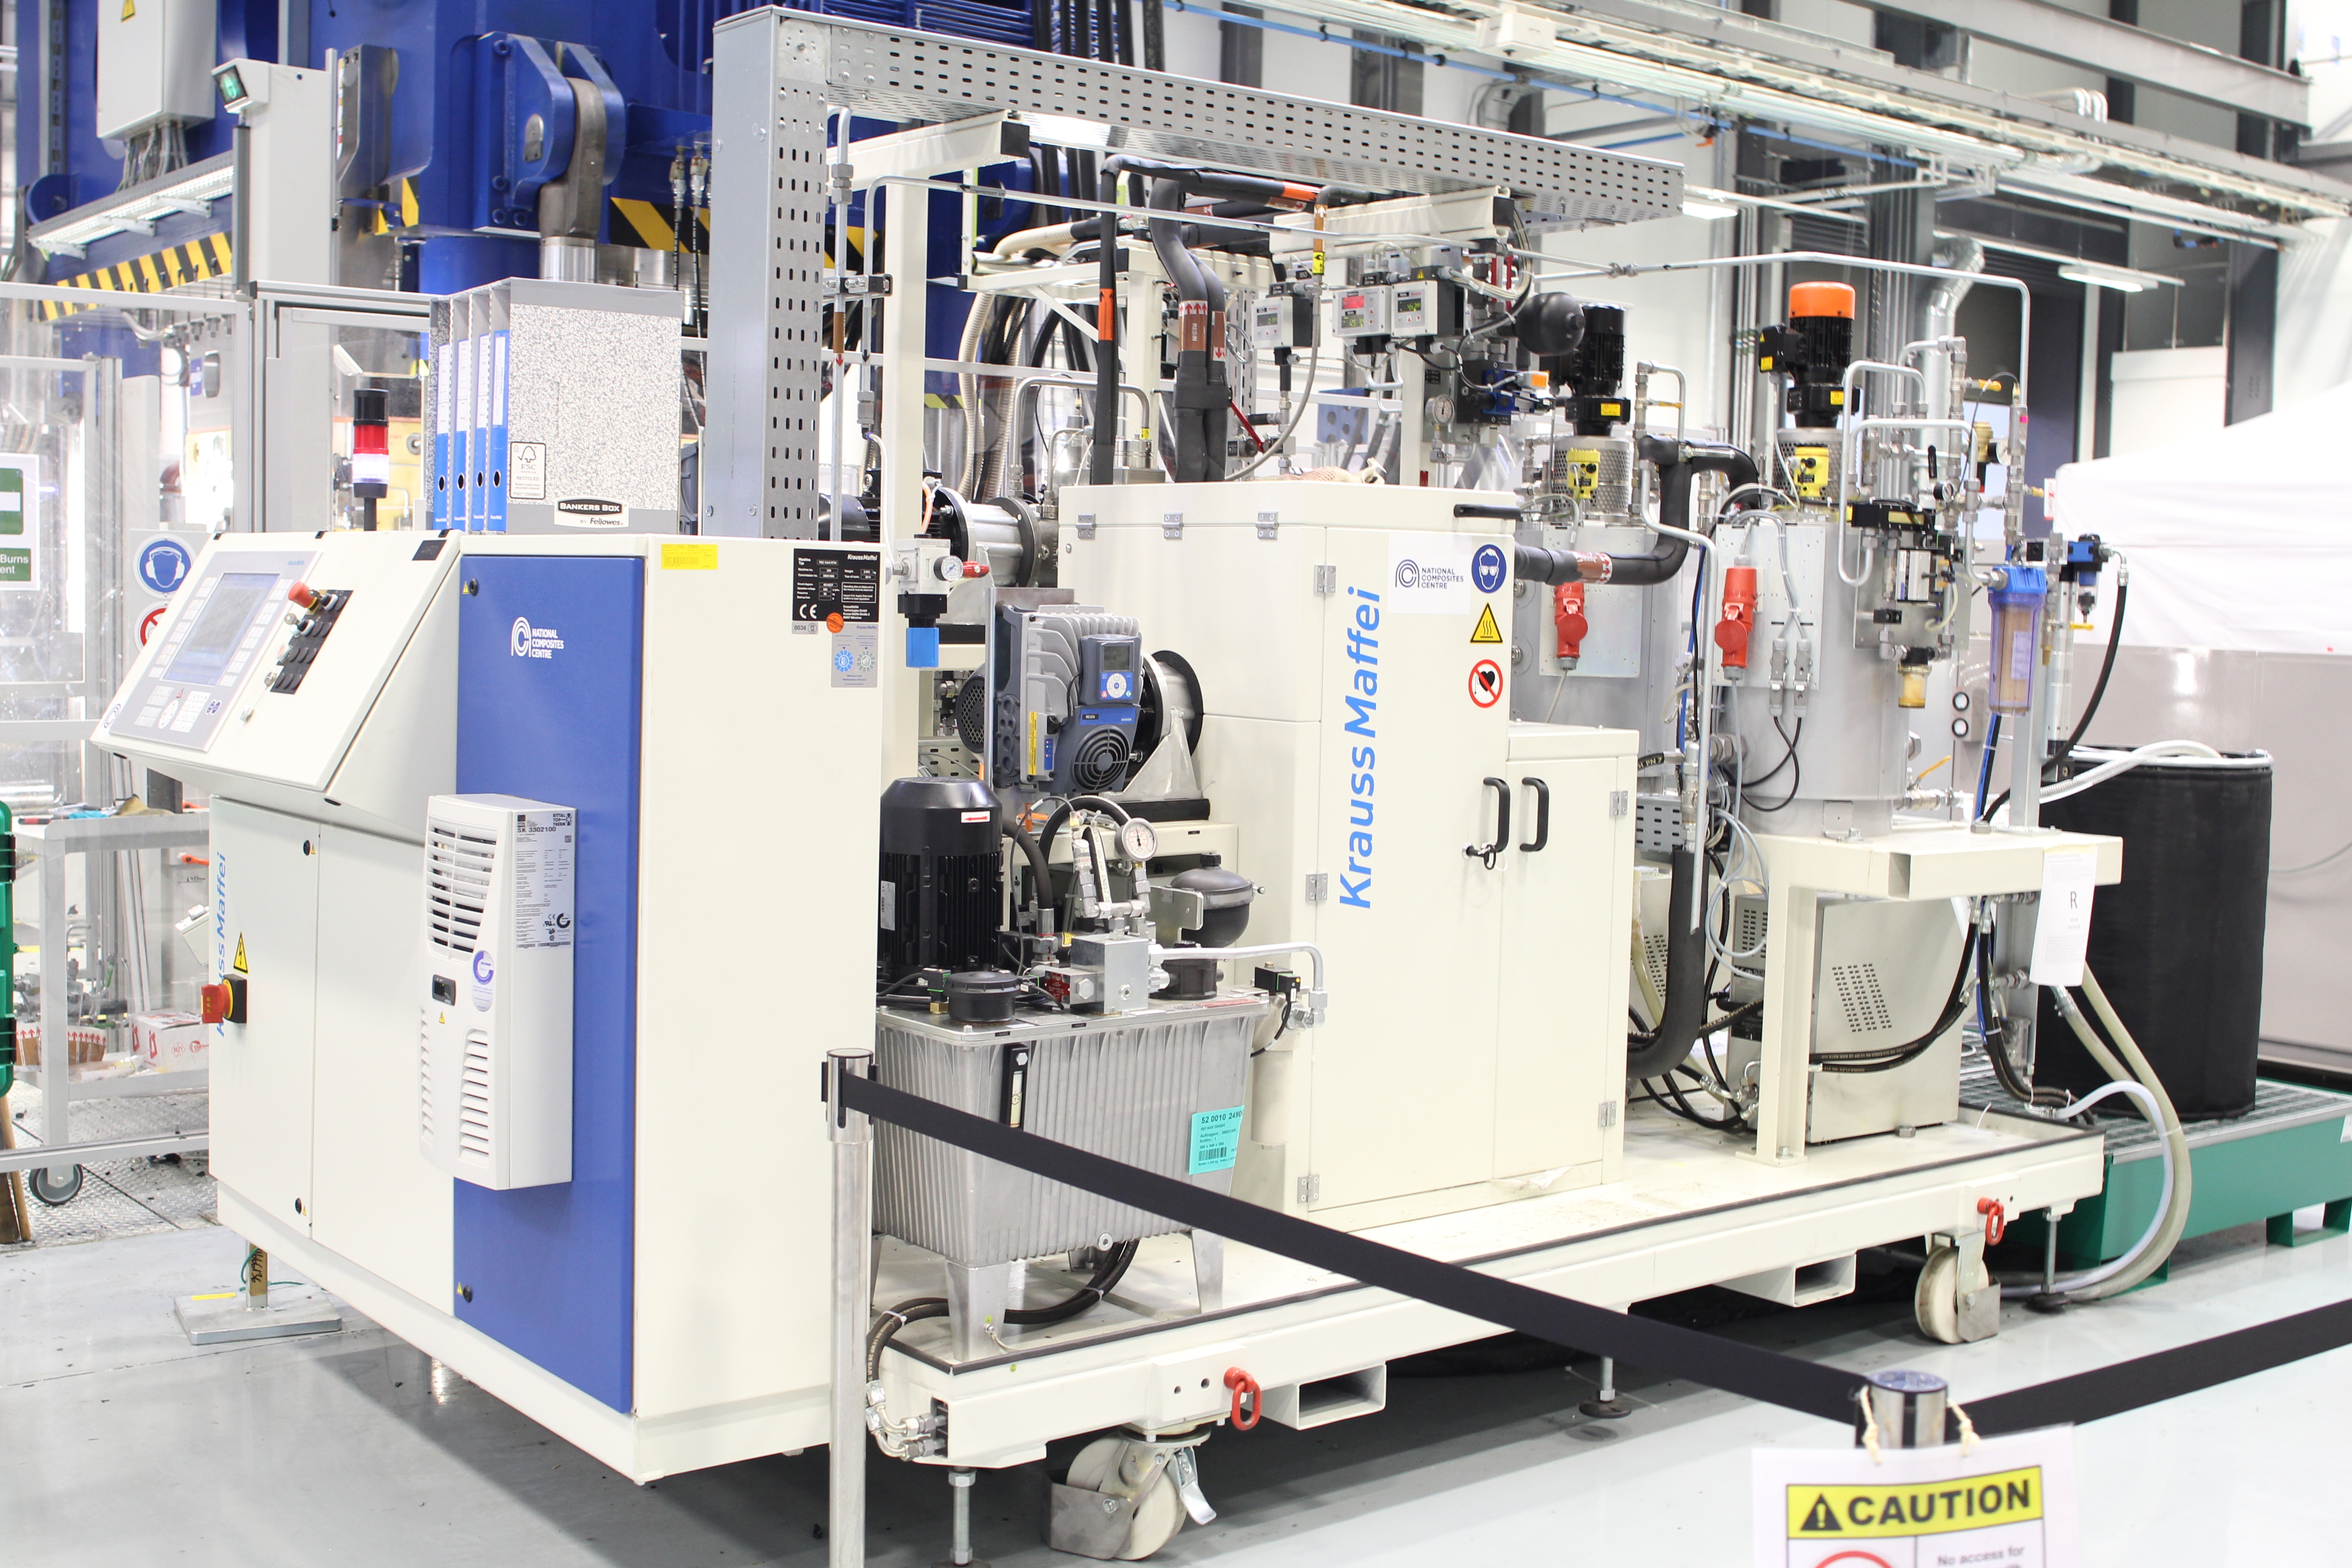 The KraussMaffei RimStar Compact 4/4/4 mixing and metering machine at the National Composites Center.